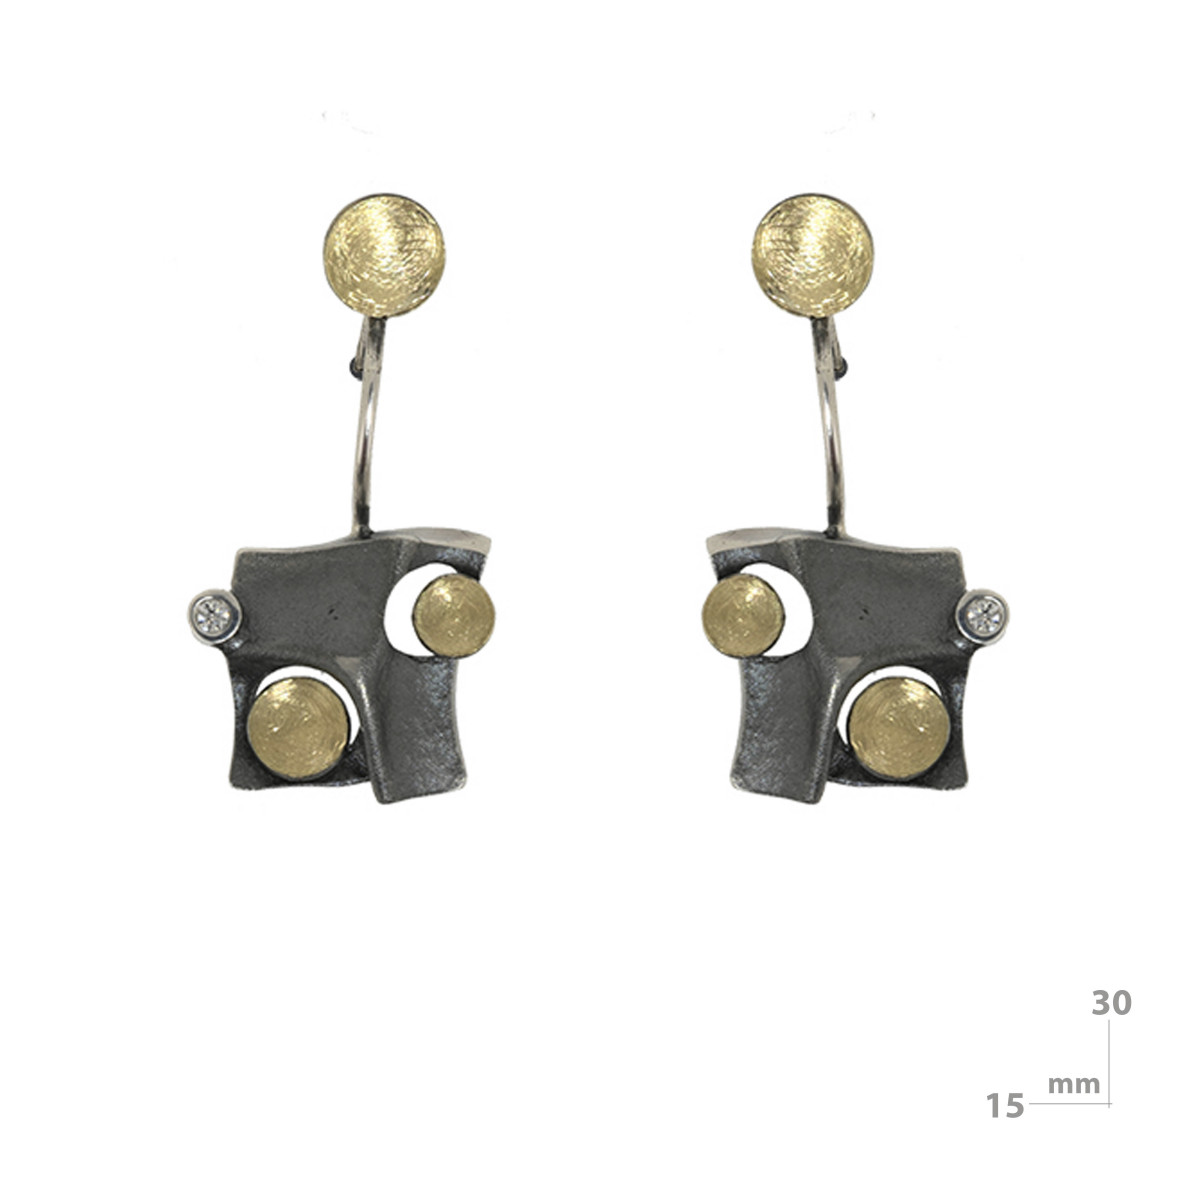 Silver, gold and brilliant earrings